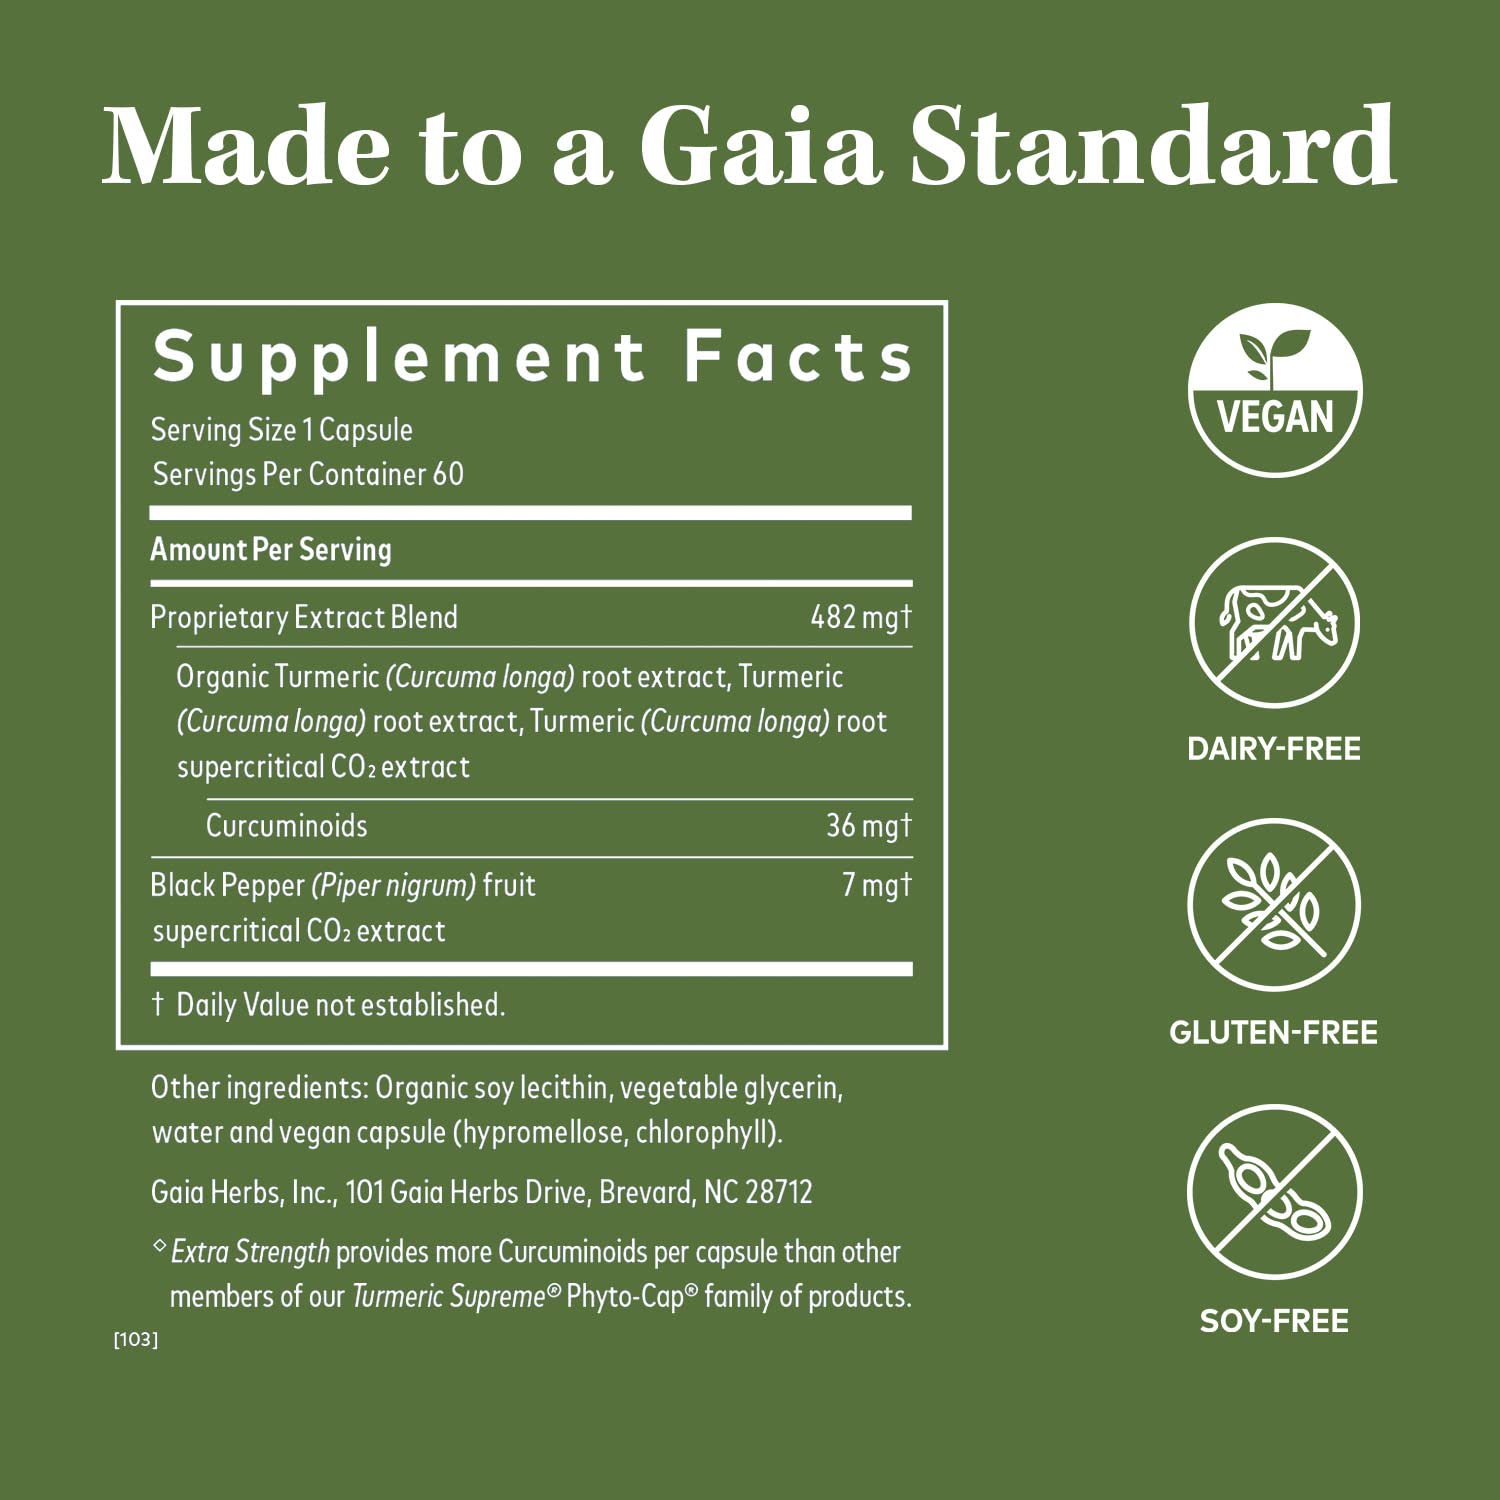 Gaia Herbs Turmeric Supreme Extra Strength - Helps Reduce Occasional Discomfort from Normal Wear & Tear - with Turmeric Curcumin & Black Pepper - 60 Vegan Liquid Phyto-Capsules (Up to 60-Day Supply)